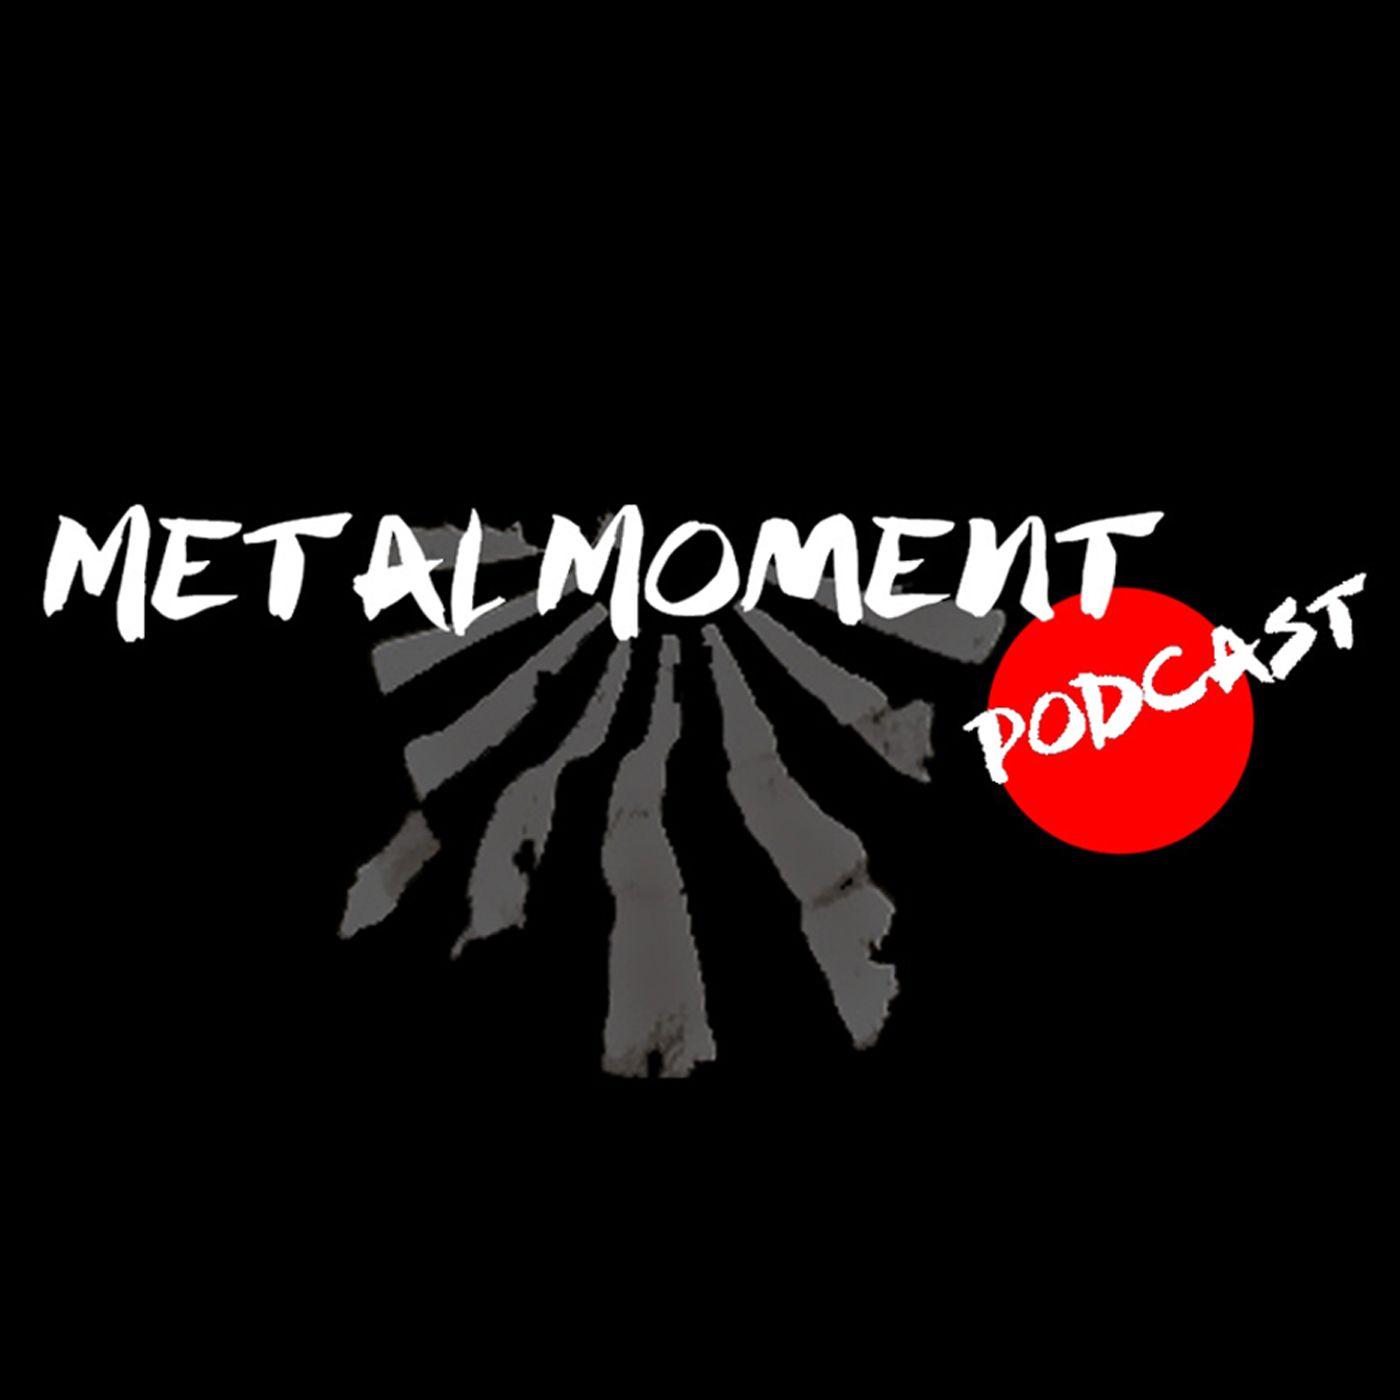 Metal Moment Podcast - English & Japanese Bilingual Show / Interviews / Guitar Talk / Beer / メタル / ビ